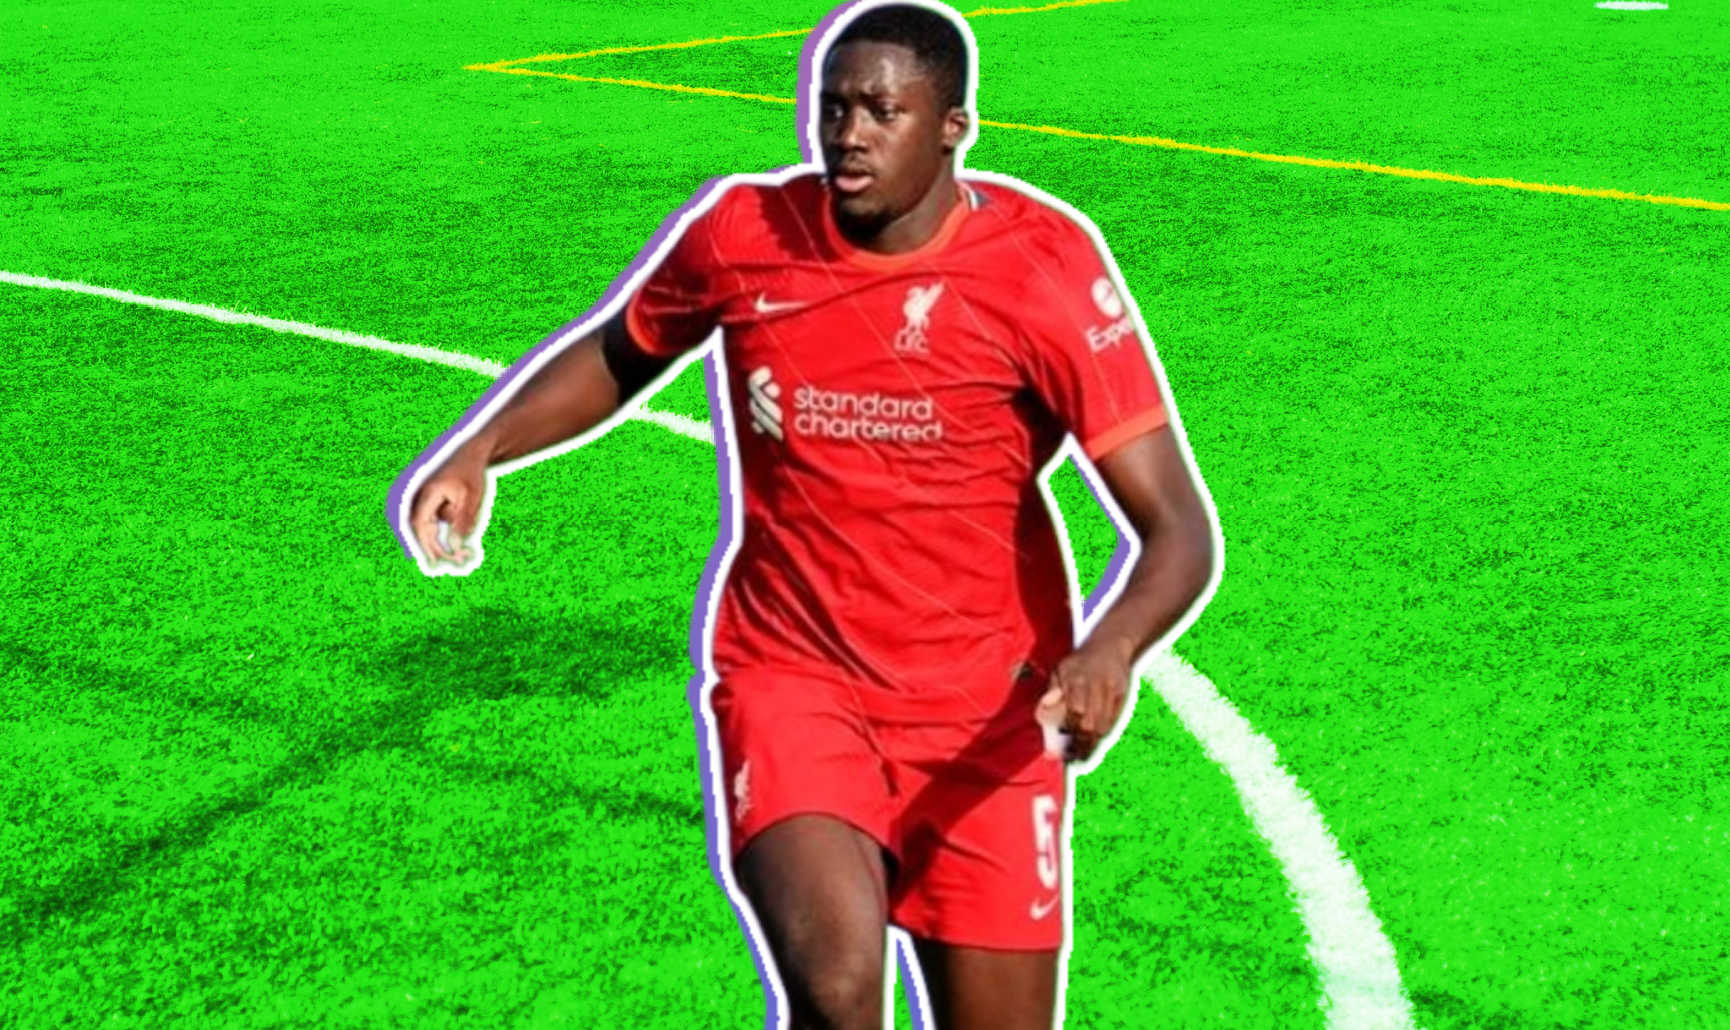 Ibrahima Konate looked cosy while marshalling Liverpool's defence against Mainz